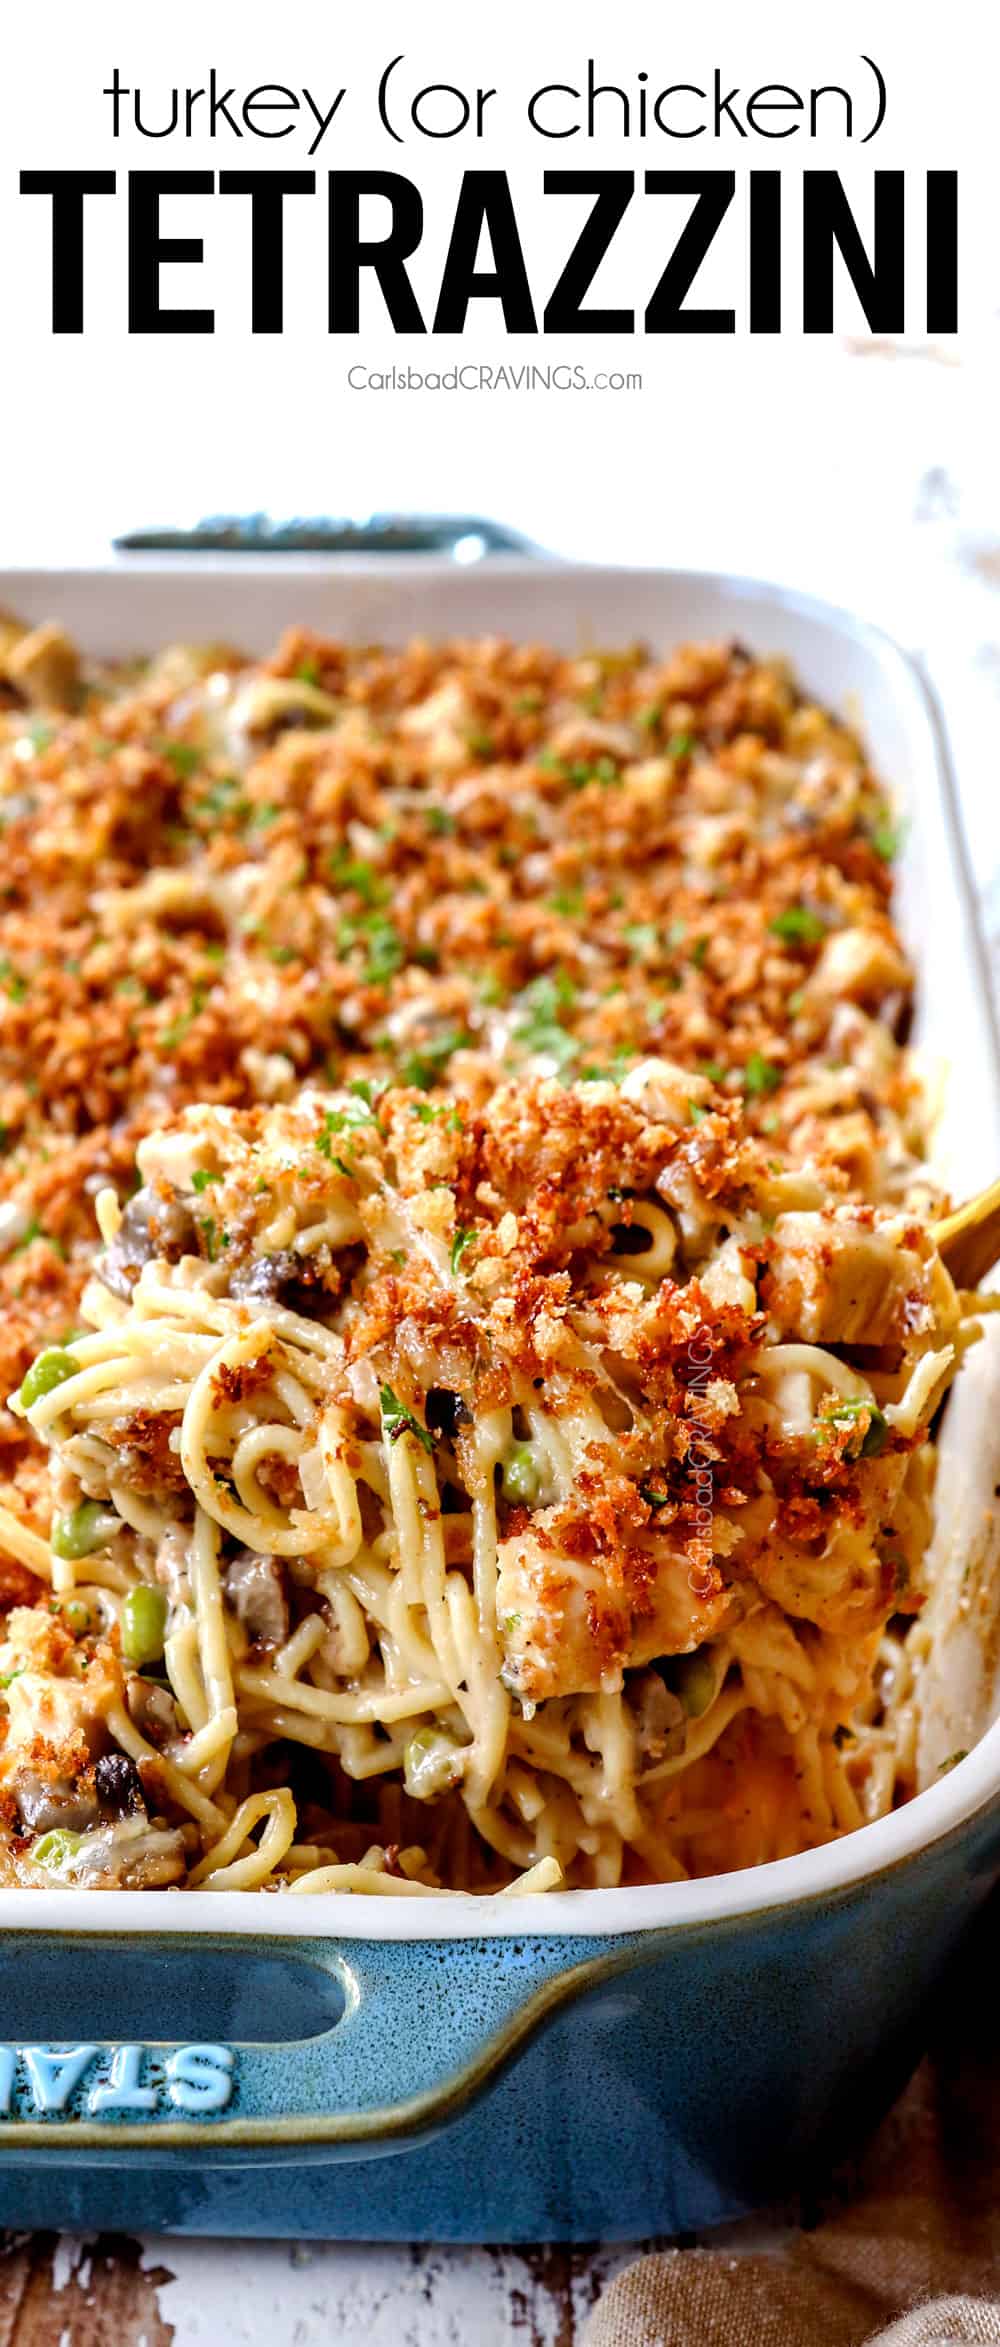 scooping up turkey tetrazzini recipe with a spoon to serve